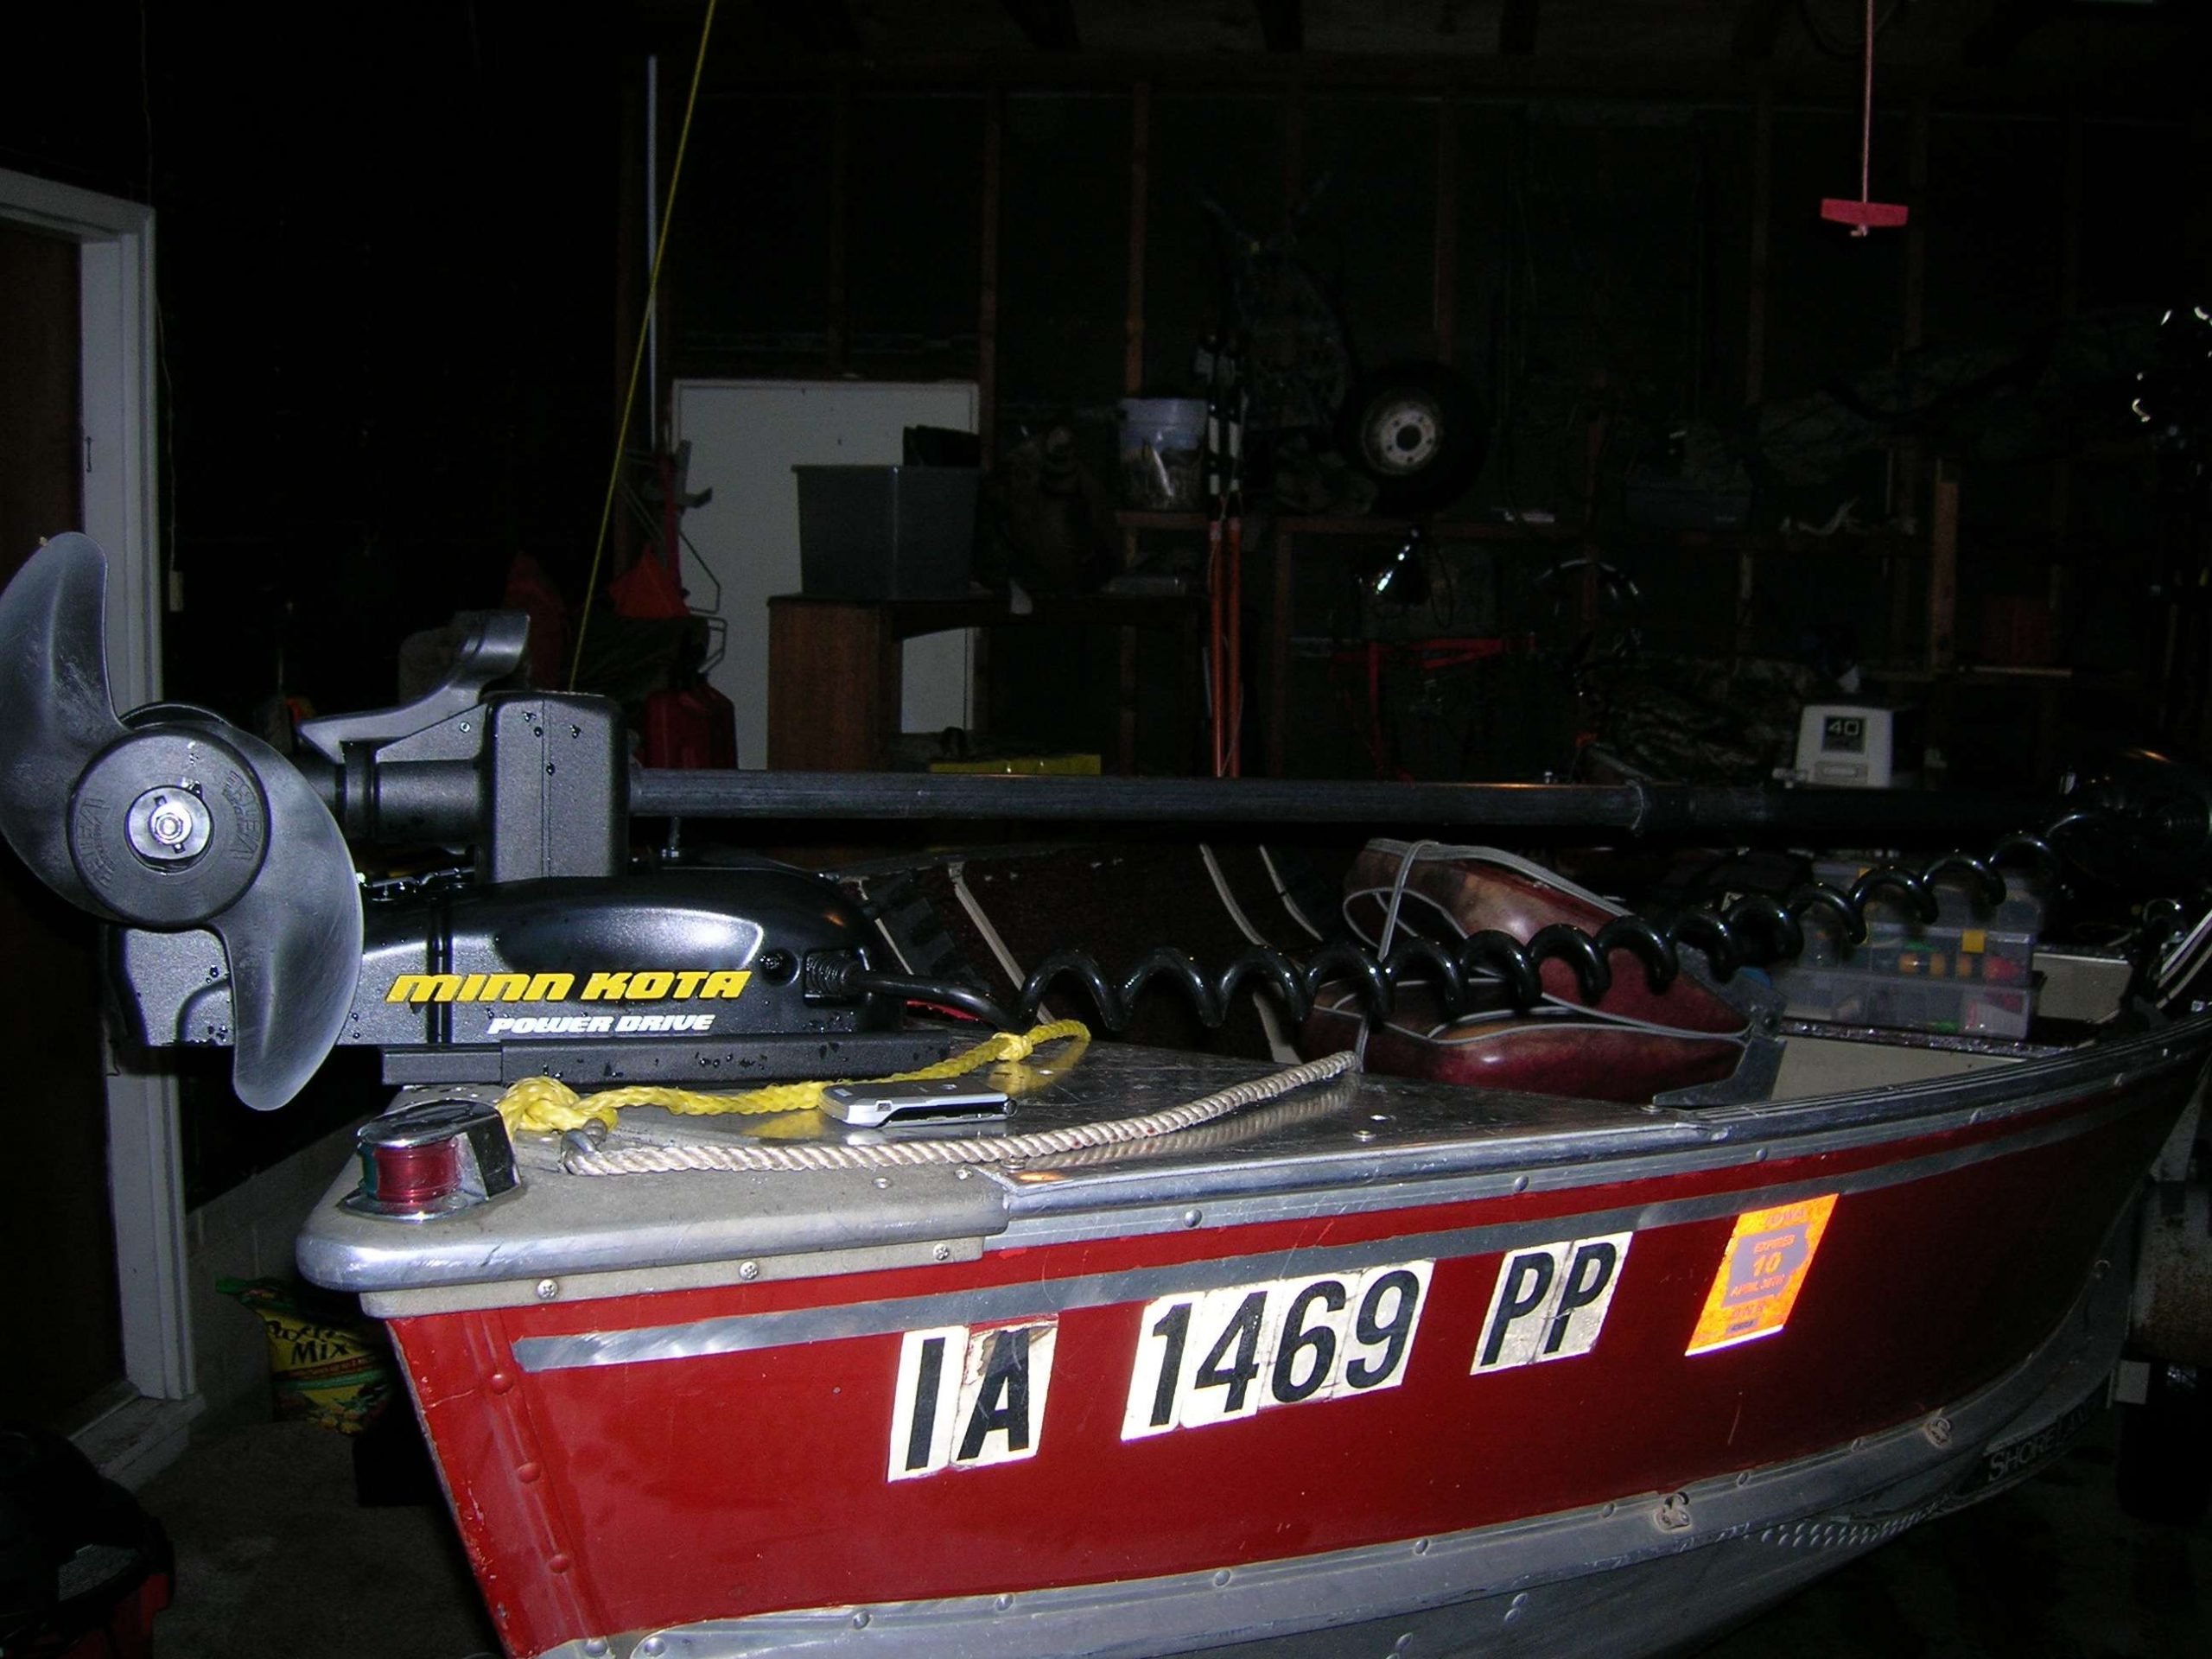 Here the trolling motor is mounted, and in front of that you can see my ultra-slick razor cellphone. 